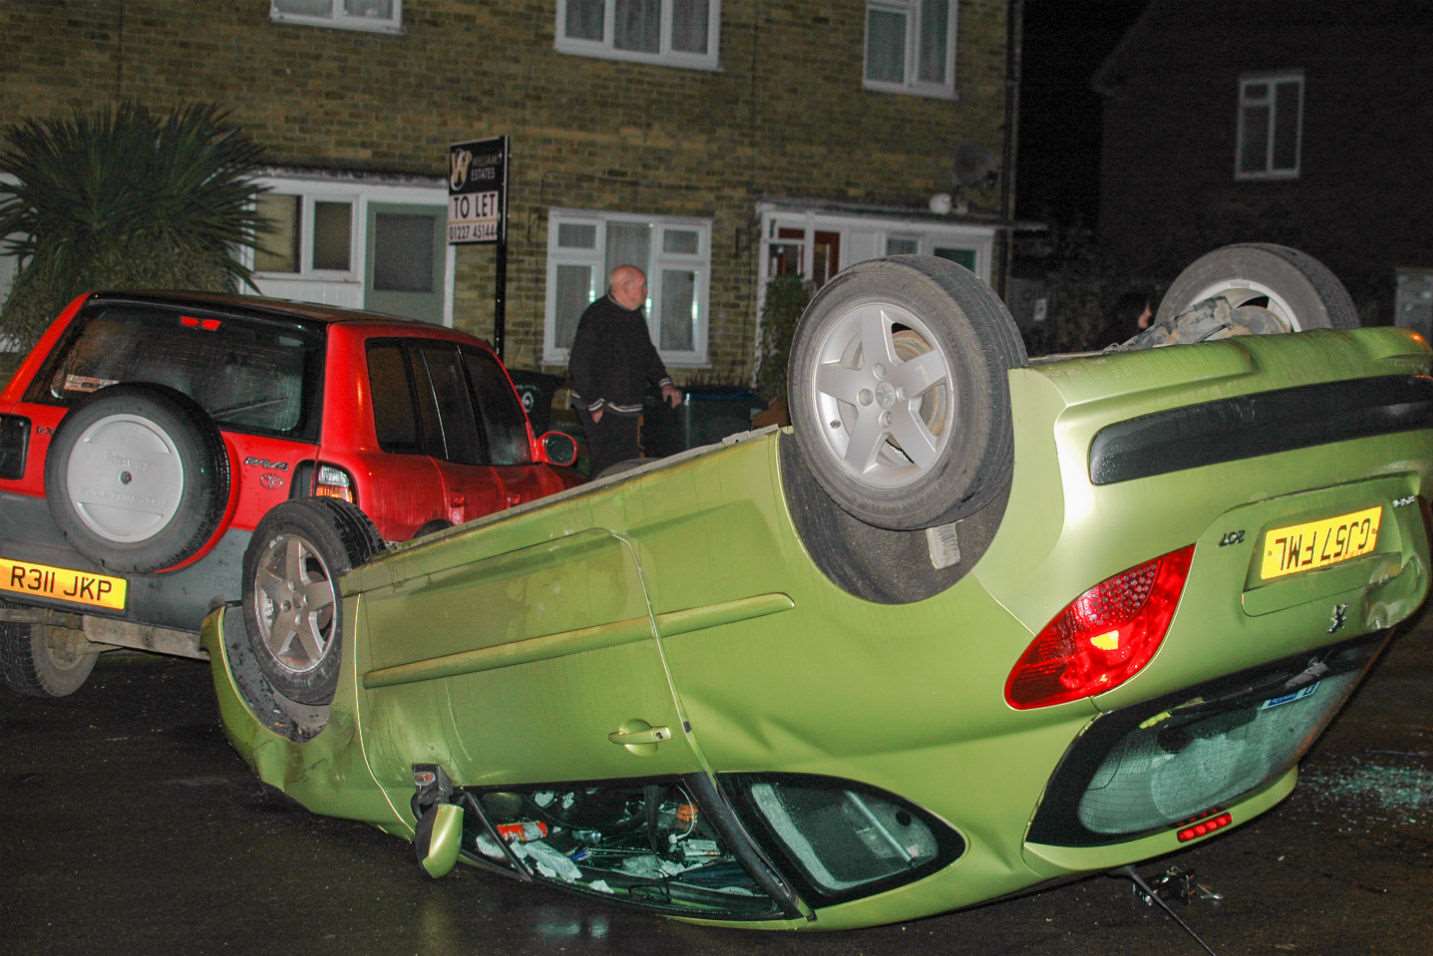 Car flipped onto its roof in early-morning smash